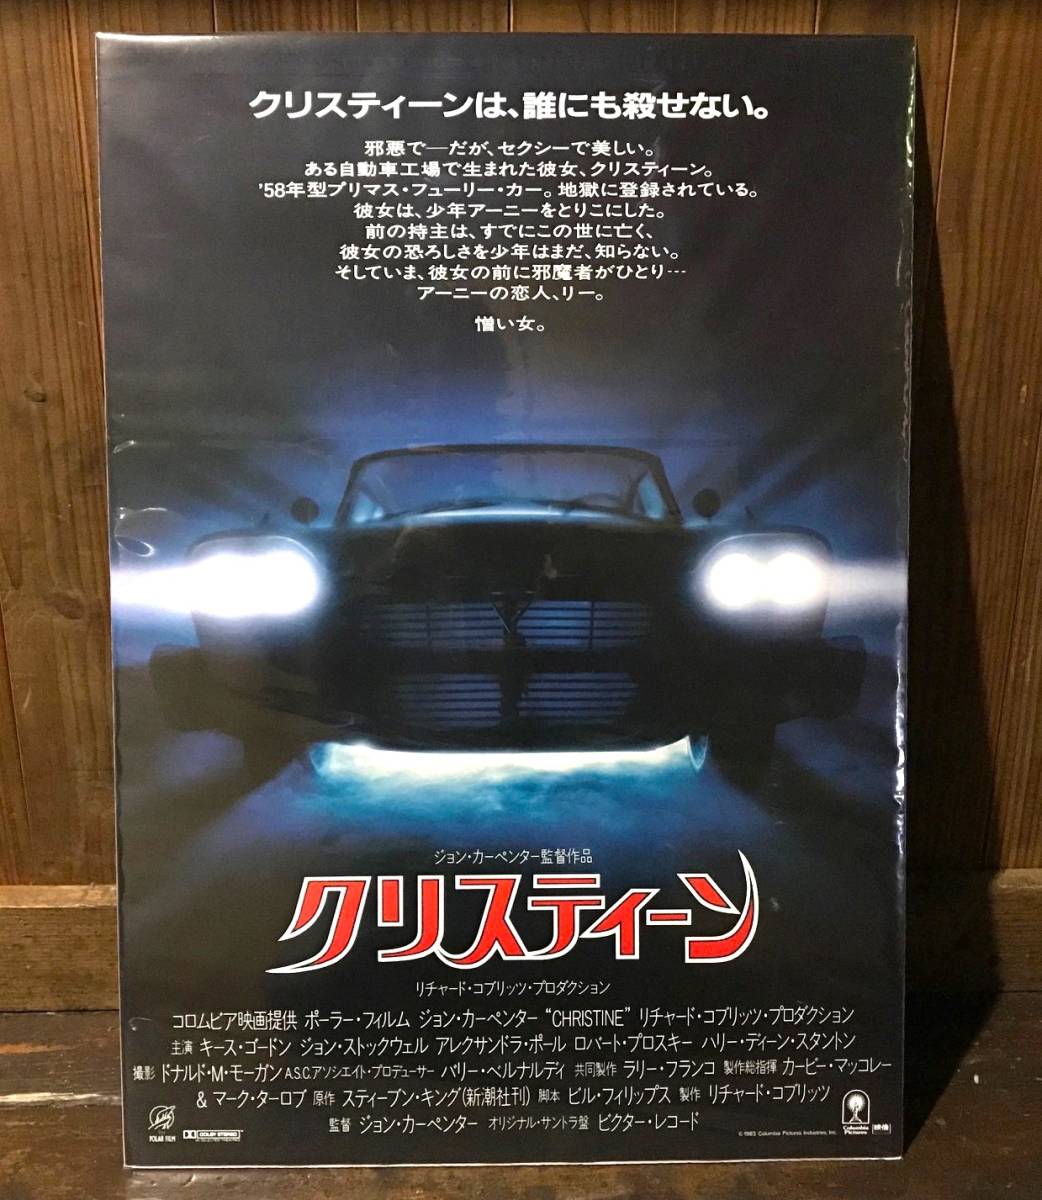  movie poster [ Christie n]1984 year the first public version / John * carpe nta- direction / Stephen * King / plymouth * Fury / horror /Christine